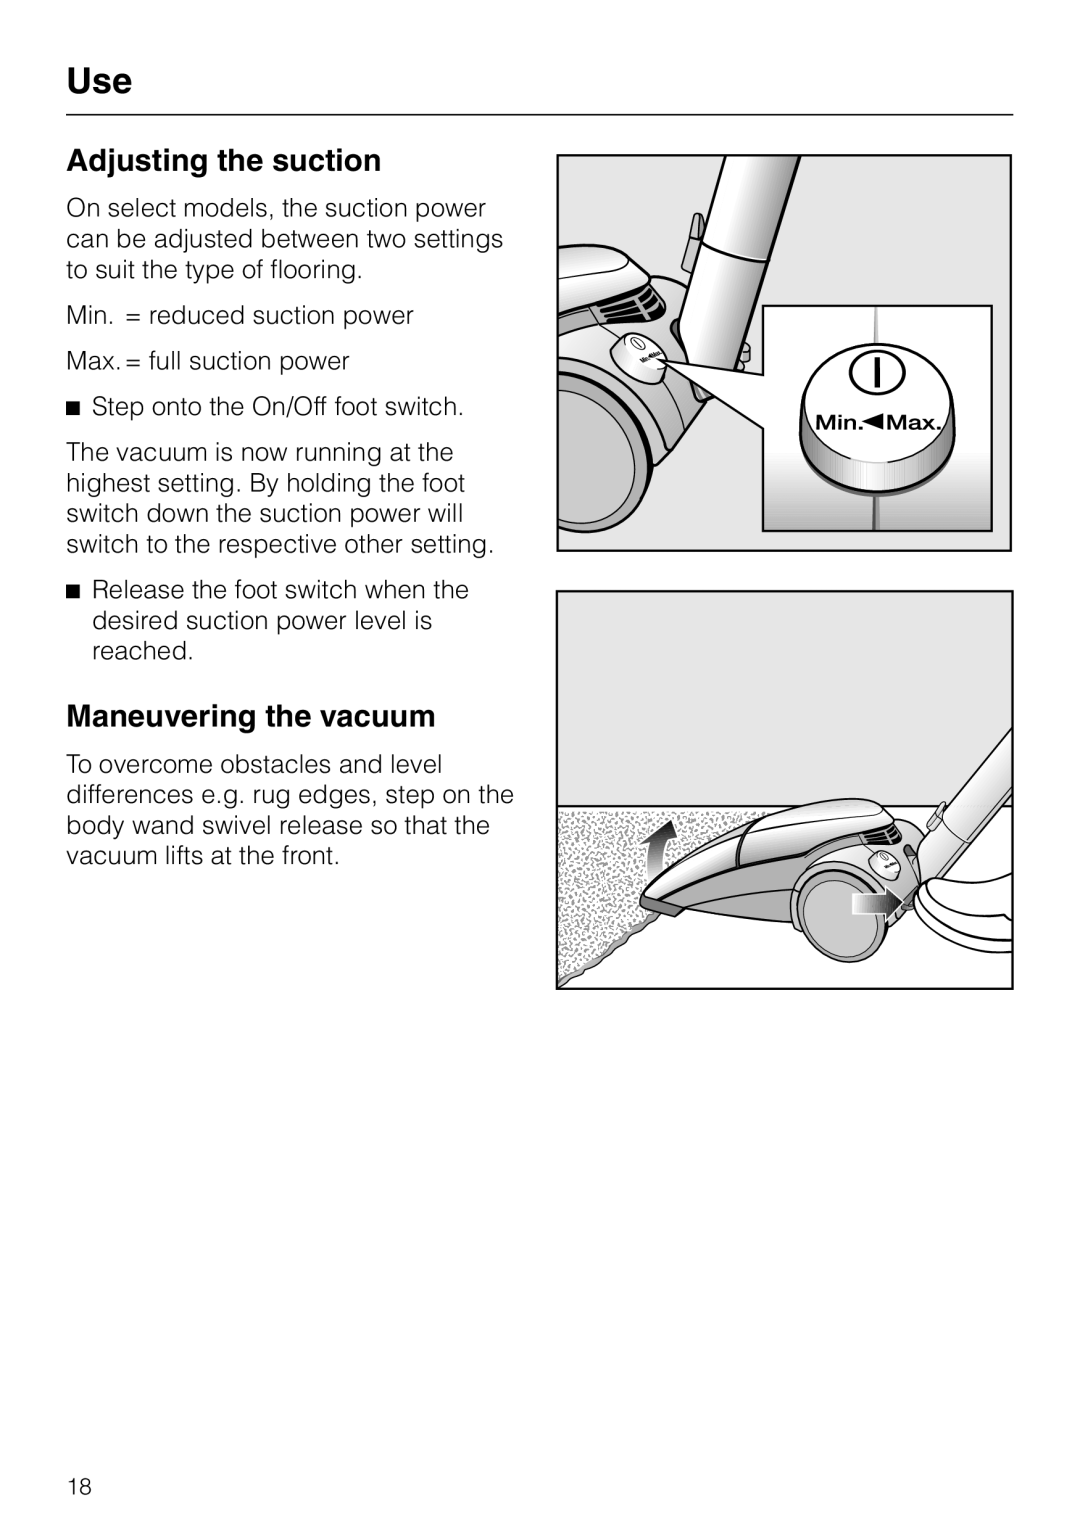 Miele HS09 operating instructions Adjusting the suction, Maneuvering the vacuum 